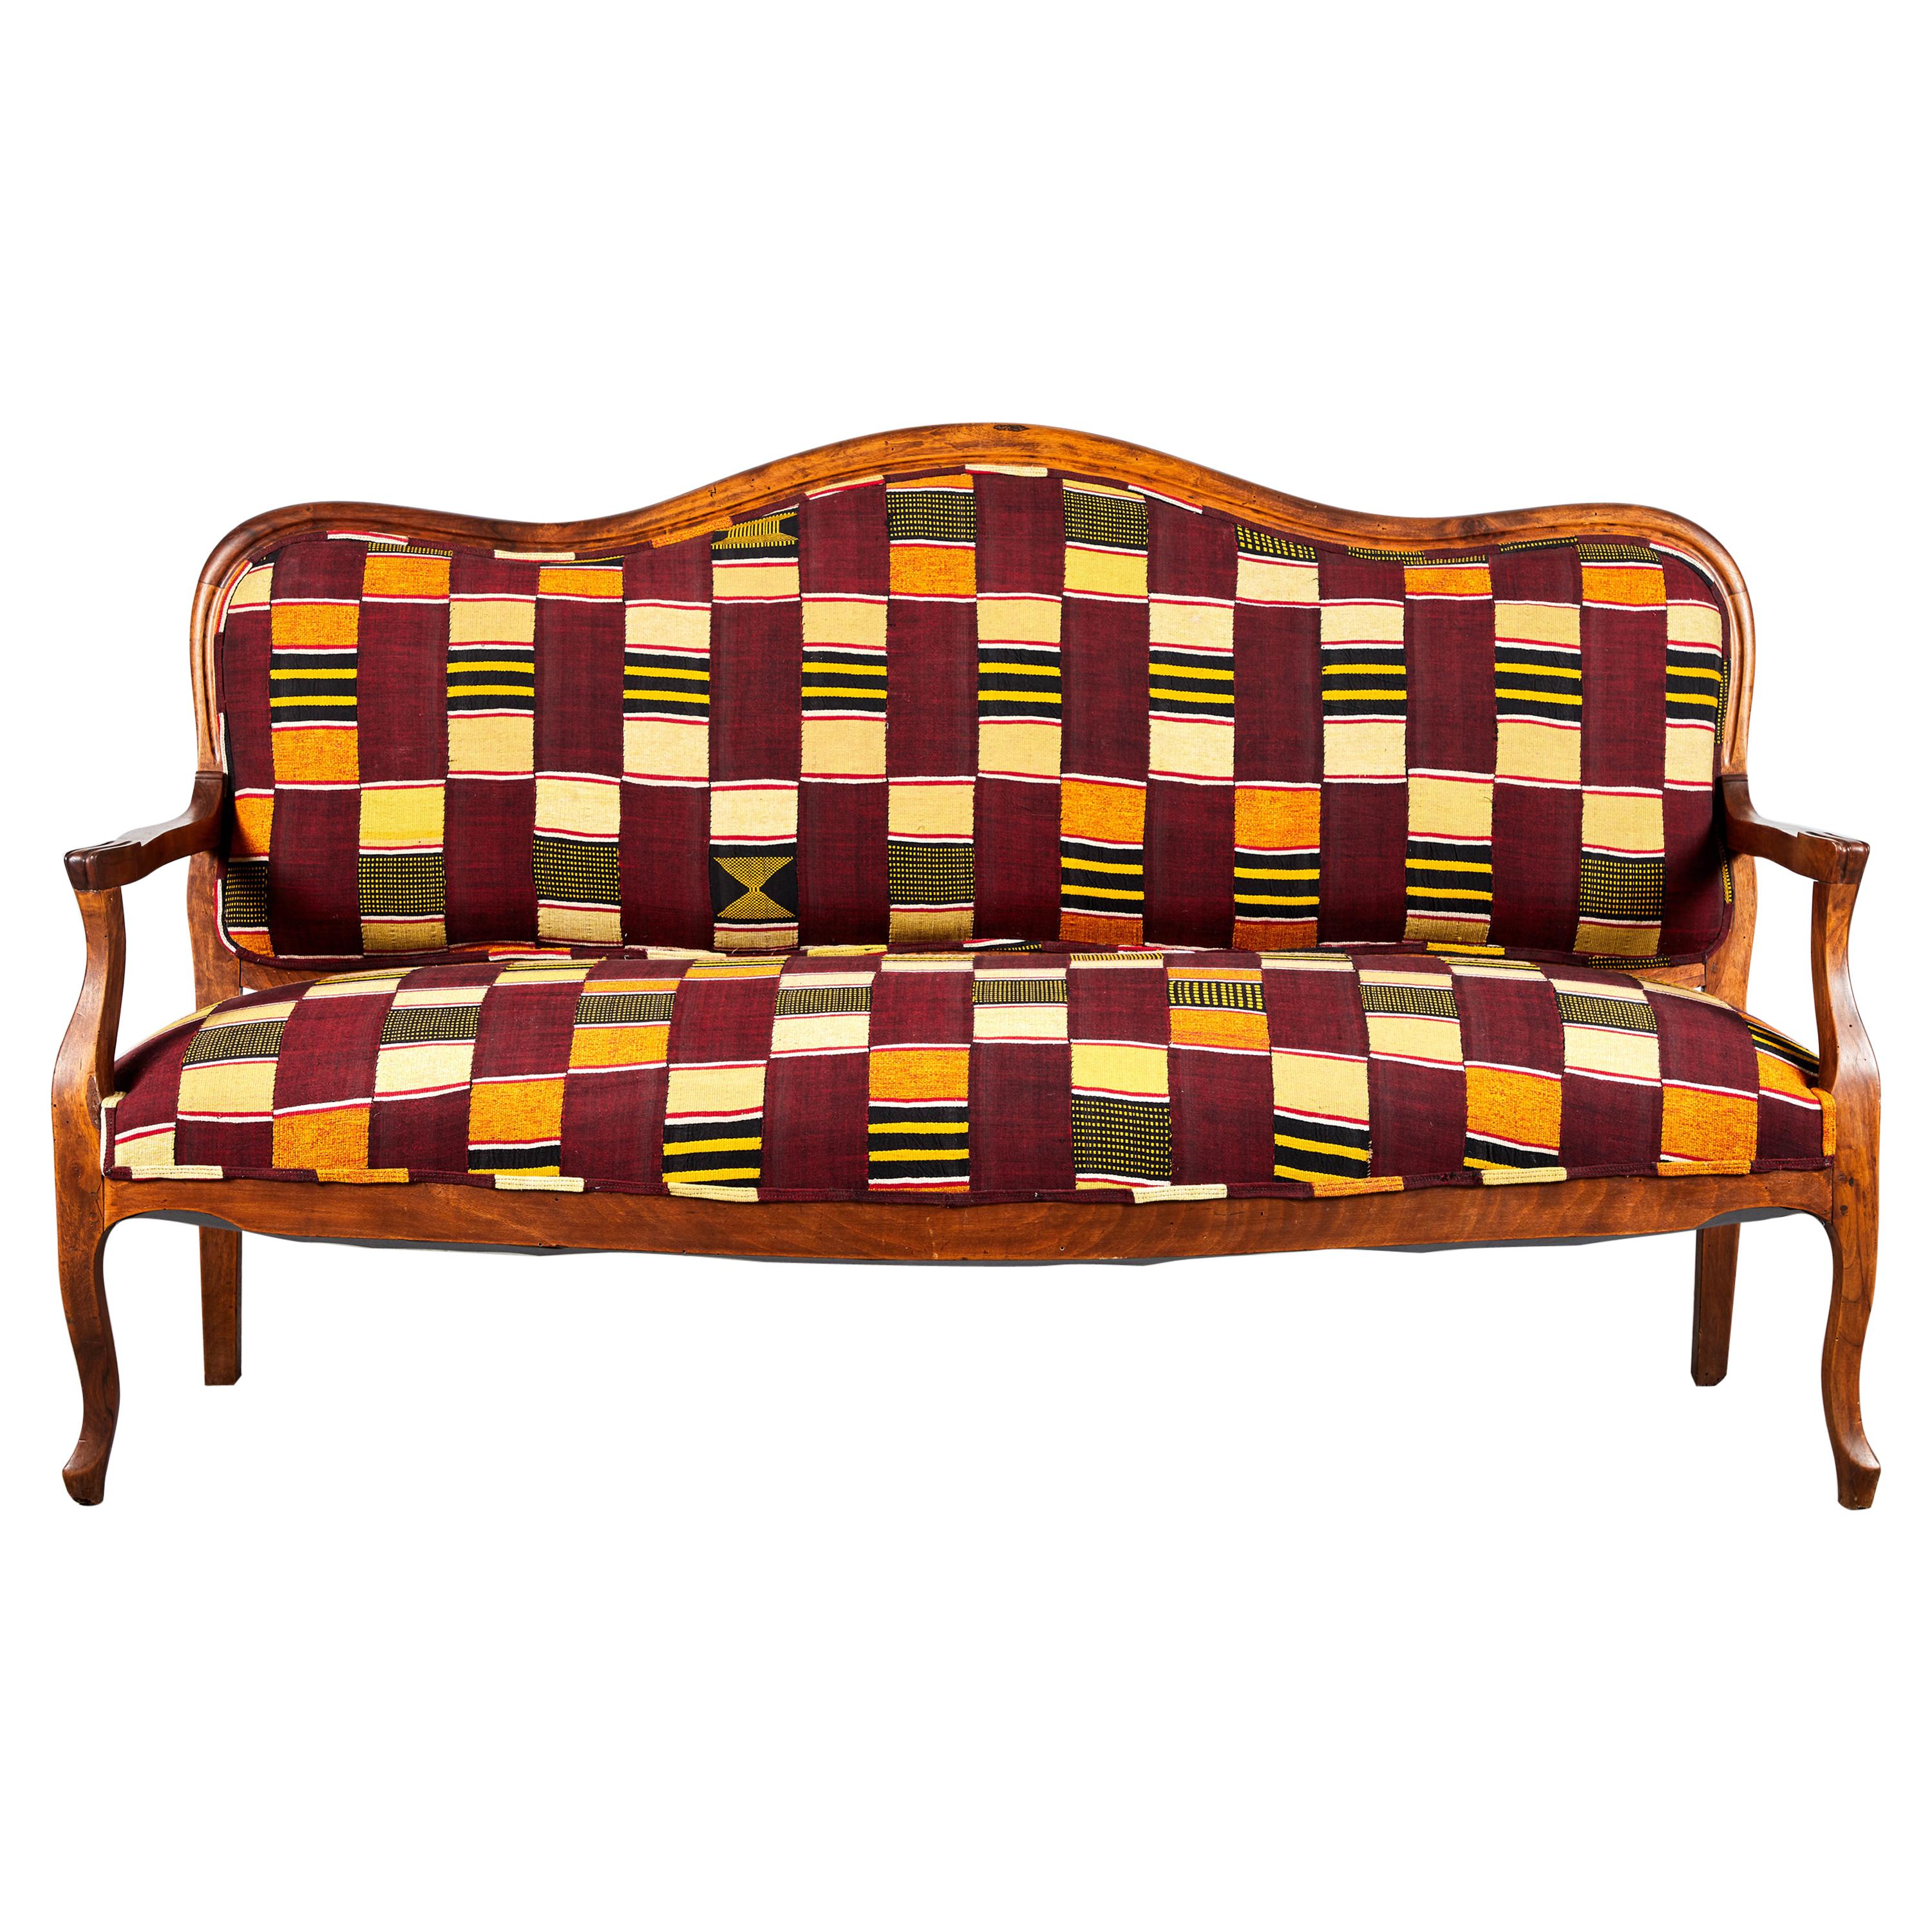 French Wooden Framed Camelback Bench in Ewe Fabric from Ghana